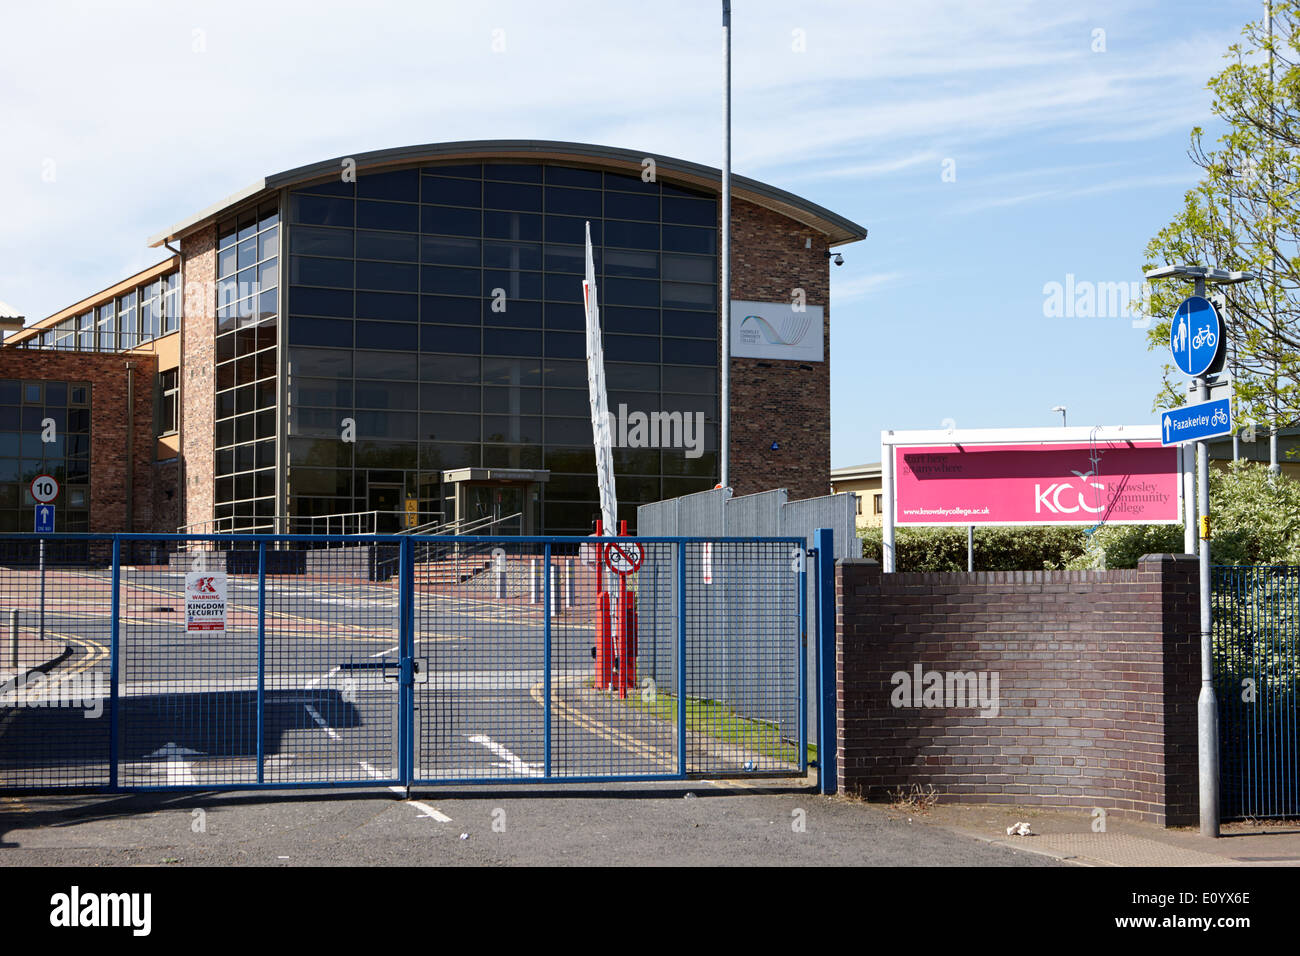 knowsley community college Kirkby town centre Merseyside UK Stock Photo